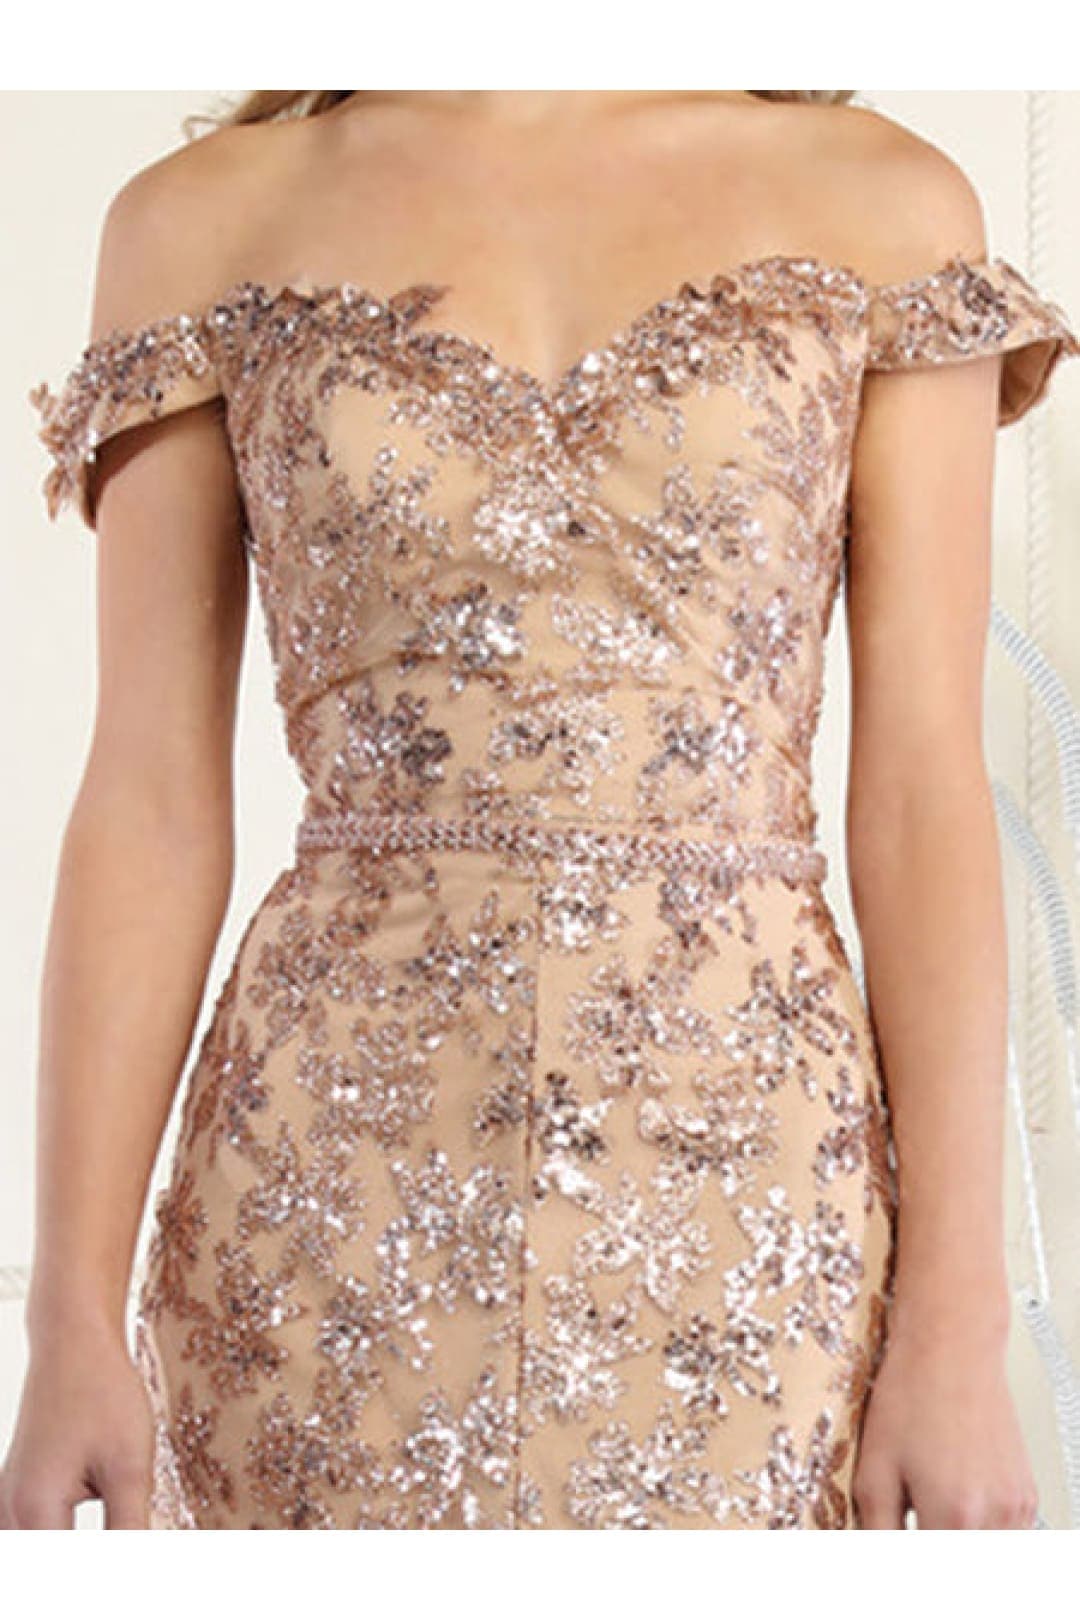 Royal Queen RQ7995 Special Occasion Rose Gold Gown - Dress